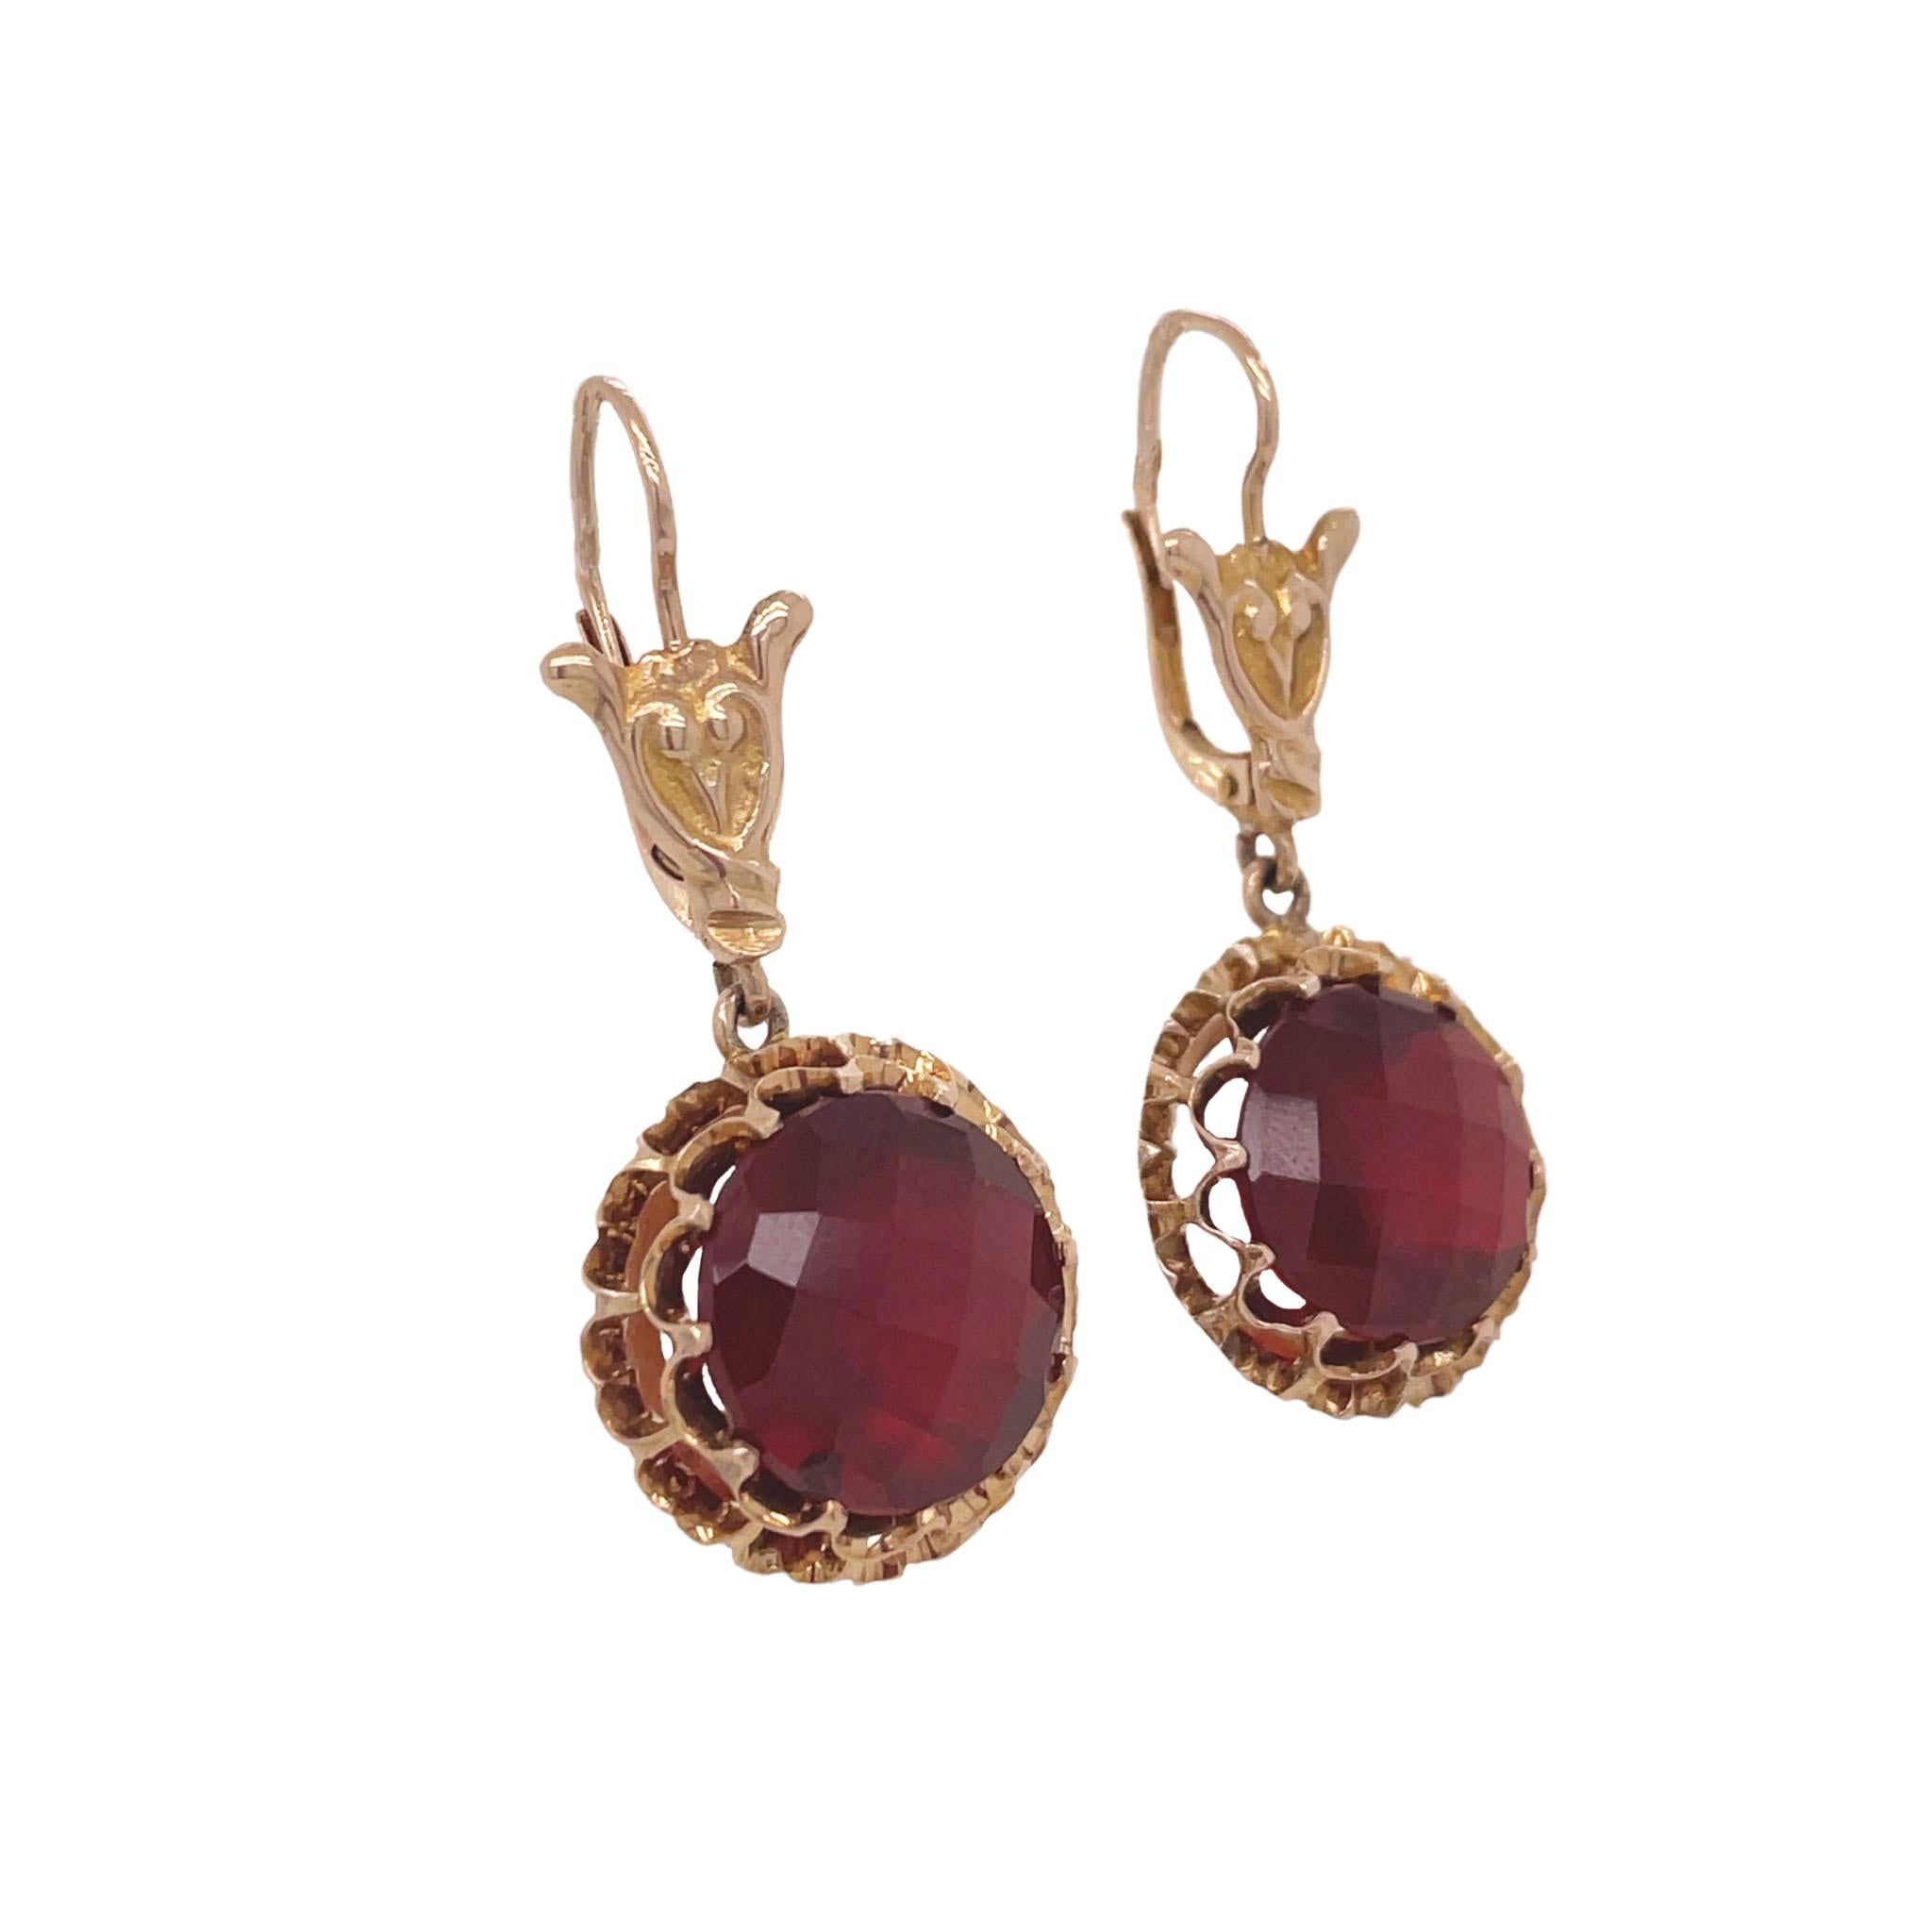 This is a pair of Edwardian Garnet earrings set in 14K Yellow Gold! Aren't these earrings just ravishing? Set in a glimmering 14K Yellow Gold are bold and beautiful rose-cut garnets that demand attention! With every movement you make, these stones